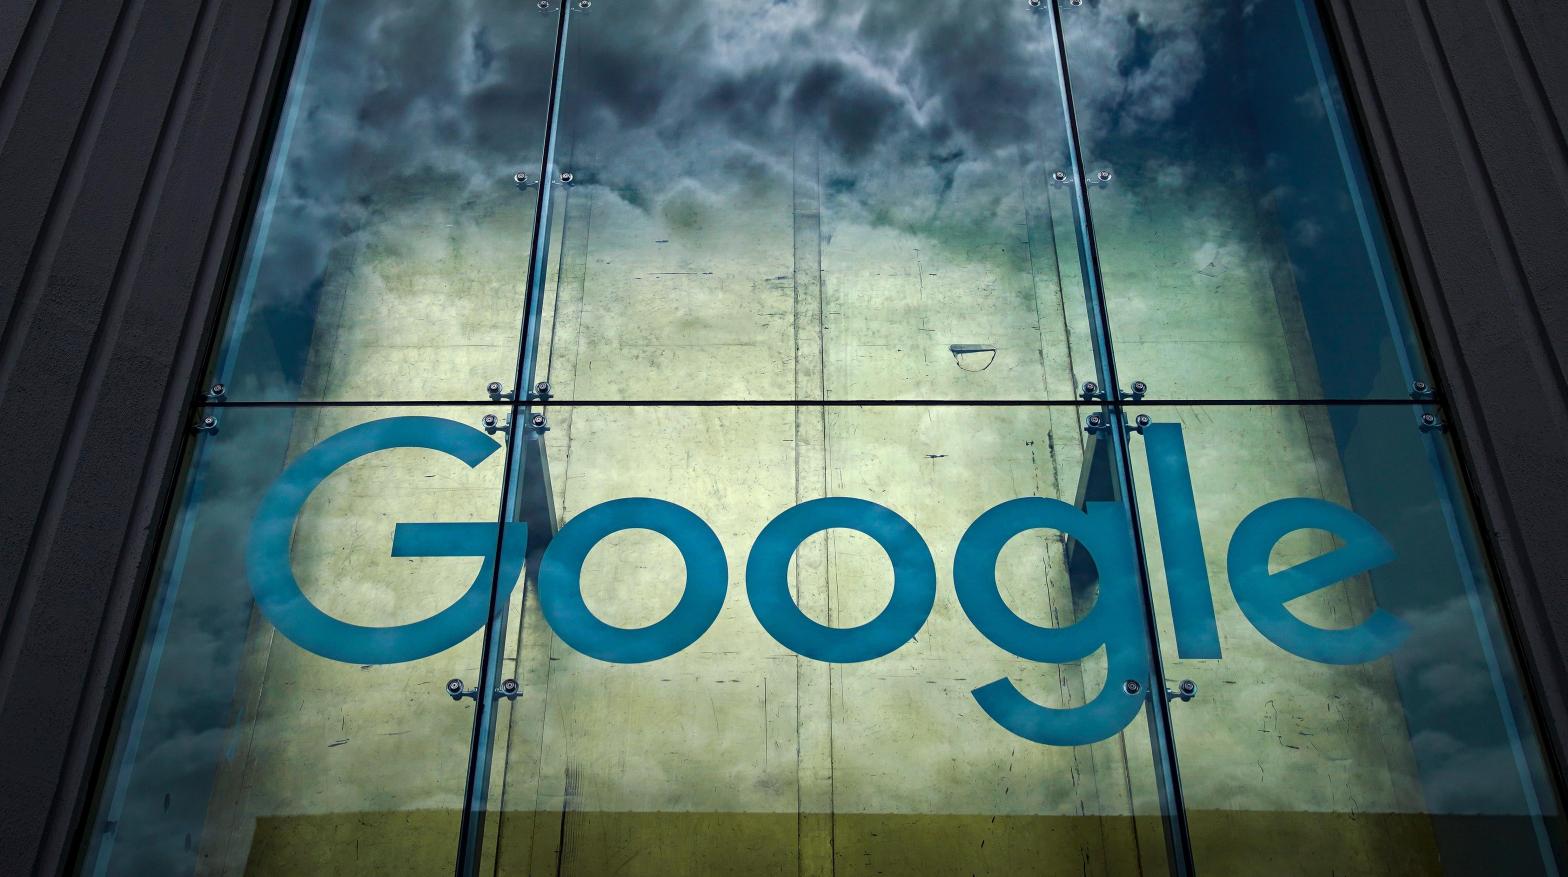 Google previously announced it was laying off 12,000 employees, or about 6% of the company. (Image: Drew Angerer, Getty Images)